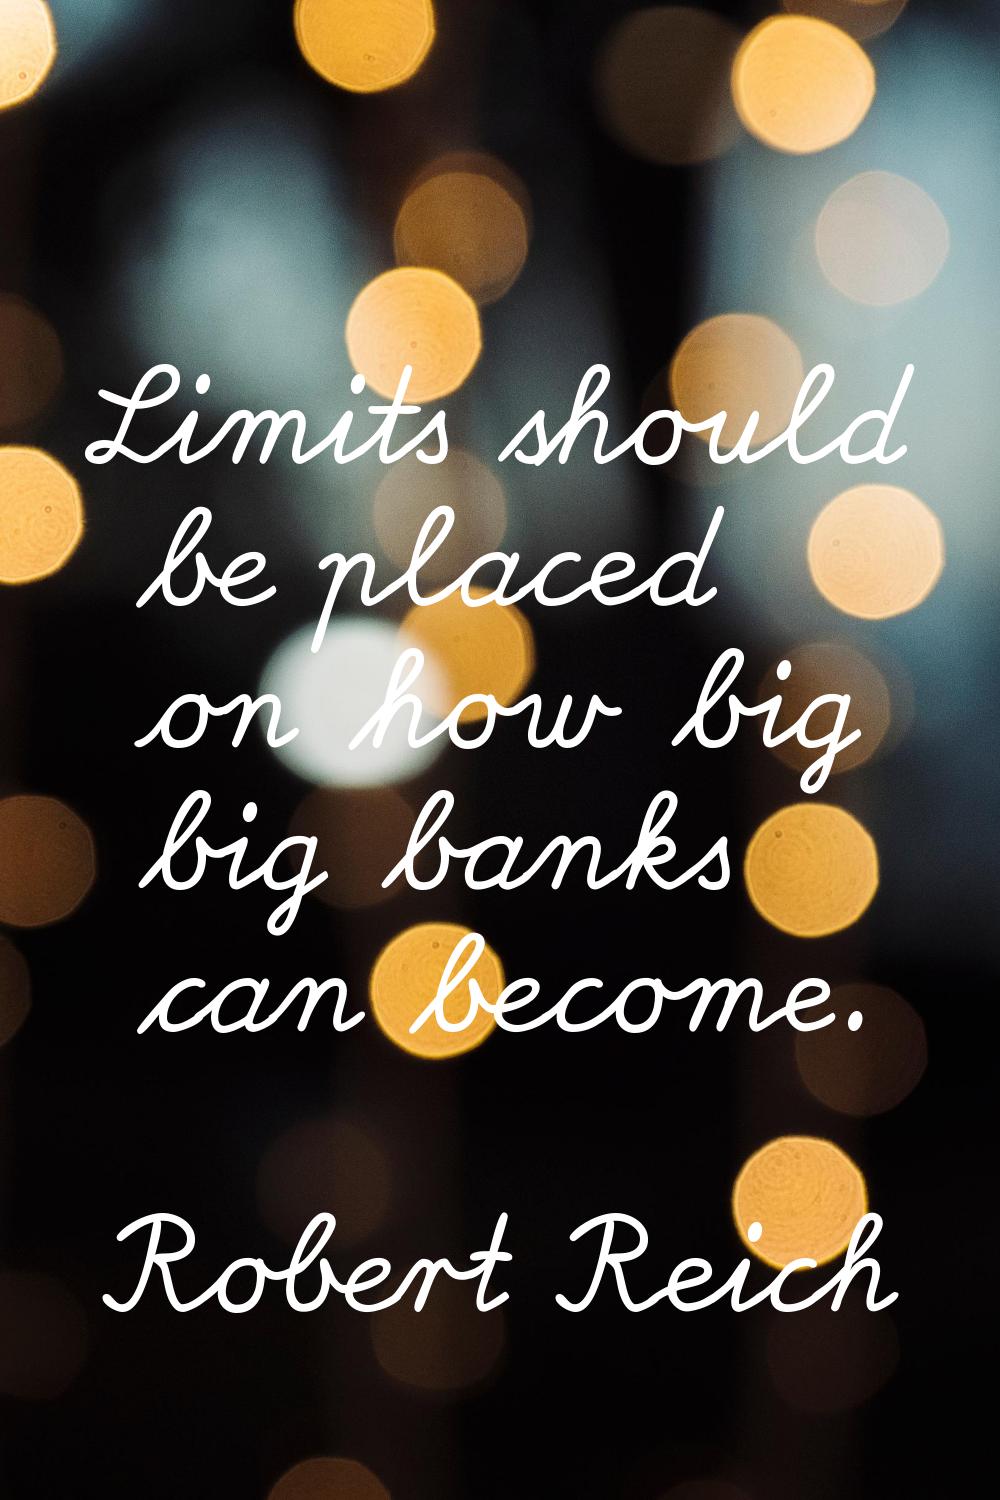 Limits should be placed on how big big banks can become.